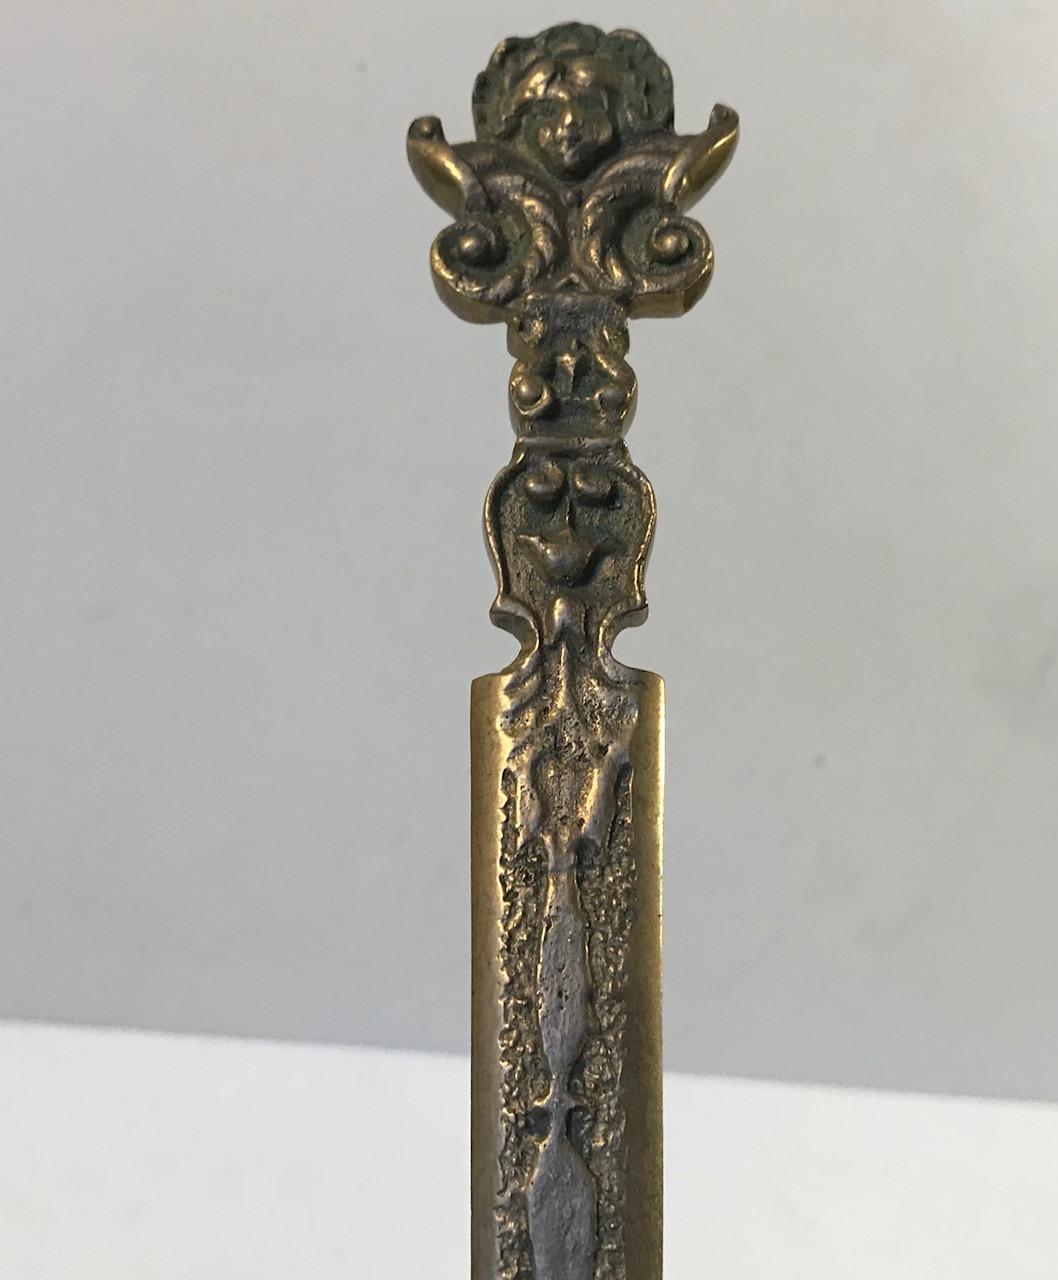 Italian revival piece of earlier presumably 16th or 17th century letter opener. Made from cast brass and it has some weight to it.